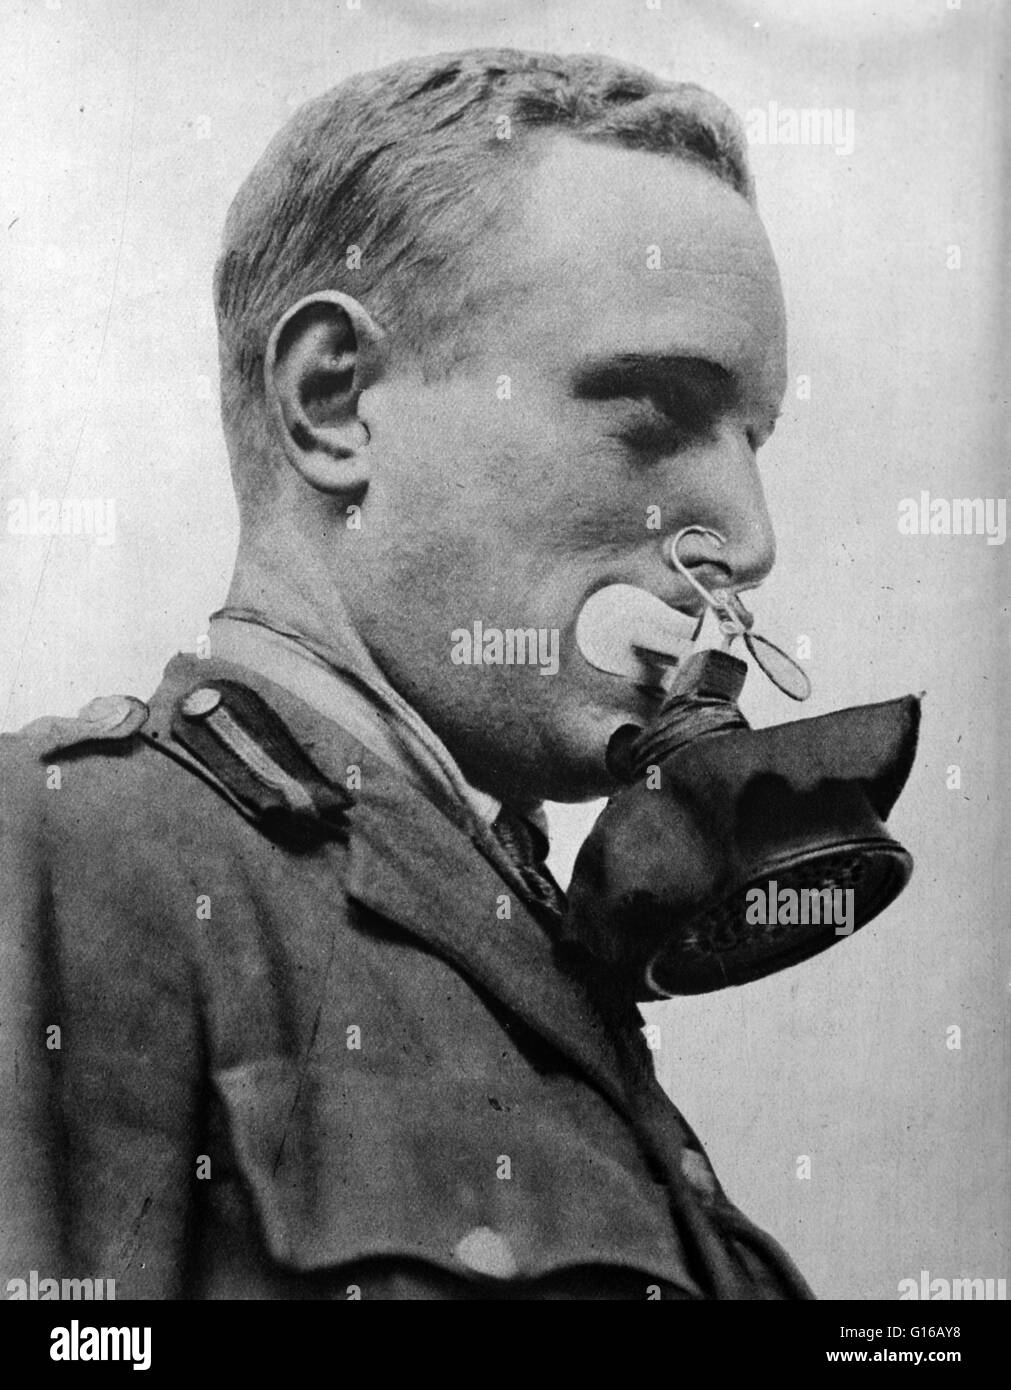 Photograph shows German soldier wearing a face mask to protect against gas attacks during World War I. The first use of poison gas on the Western Front was on April 22, 1915, by the Germans at Ypres, against Canadian and French colonial troops. The Britis Stock Photo